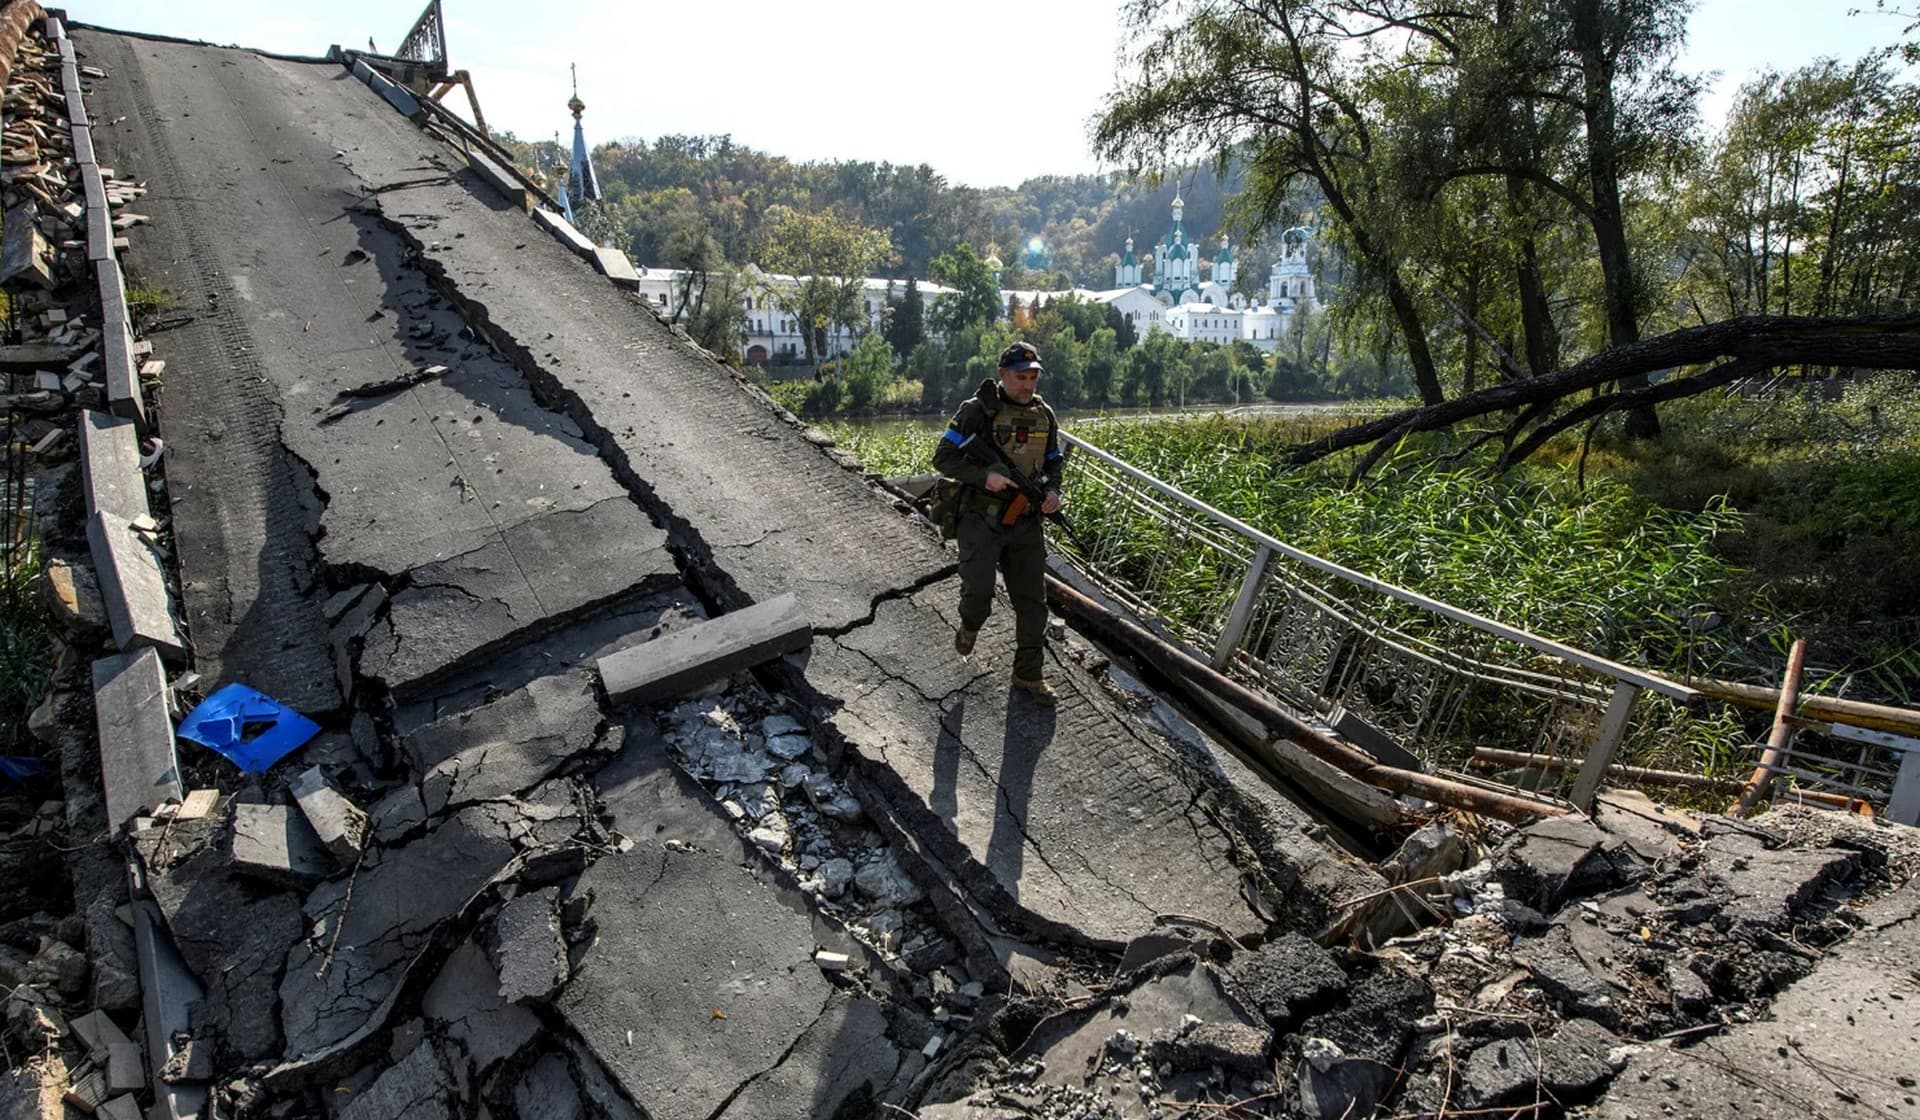 A service member of Ukraine's National Guard walks on a bridge over the Siverskyi Donets river destroyed during Russia's attack on Ukraine in the town of Sviatohirsk